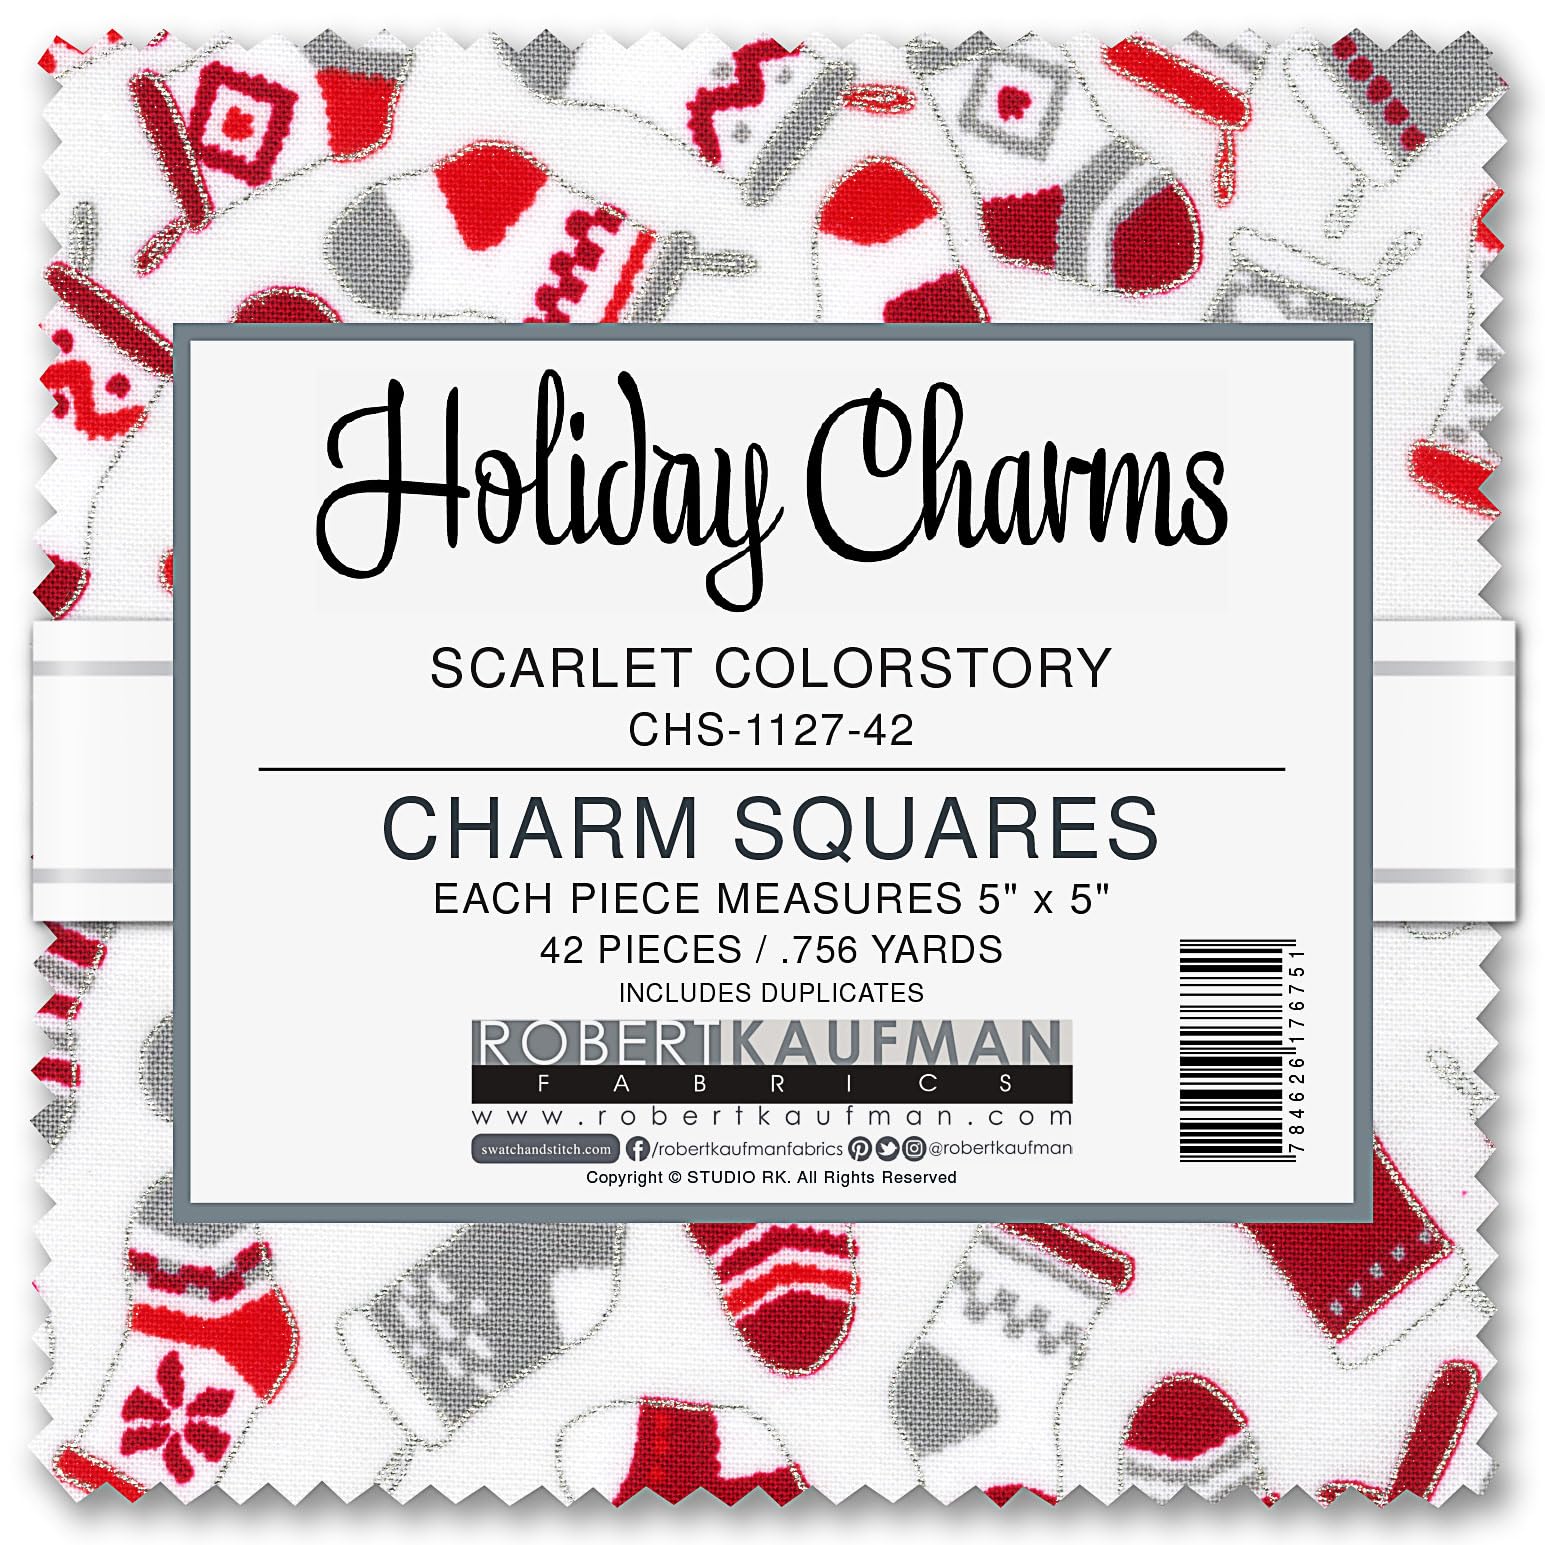 Holiday Charms Scarlet Charm Square 42 5-inch Squares Charm Pack Robert Kaufman Fabrics CHS-1127-42